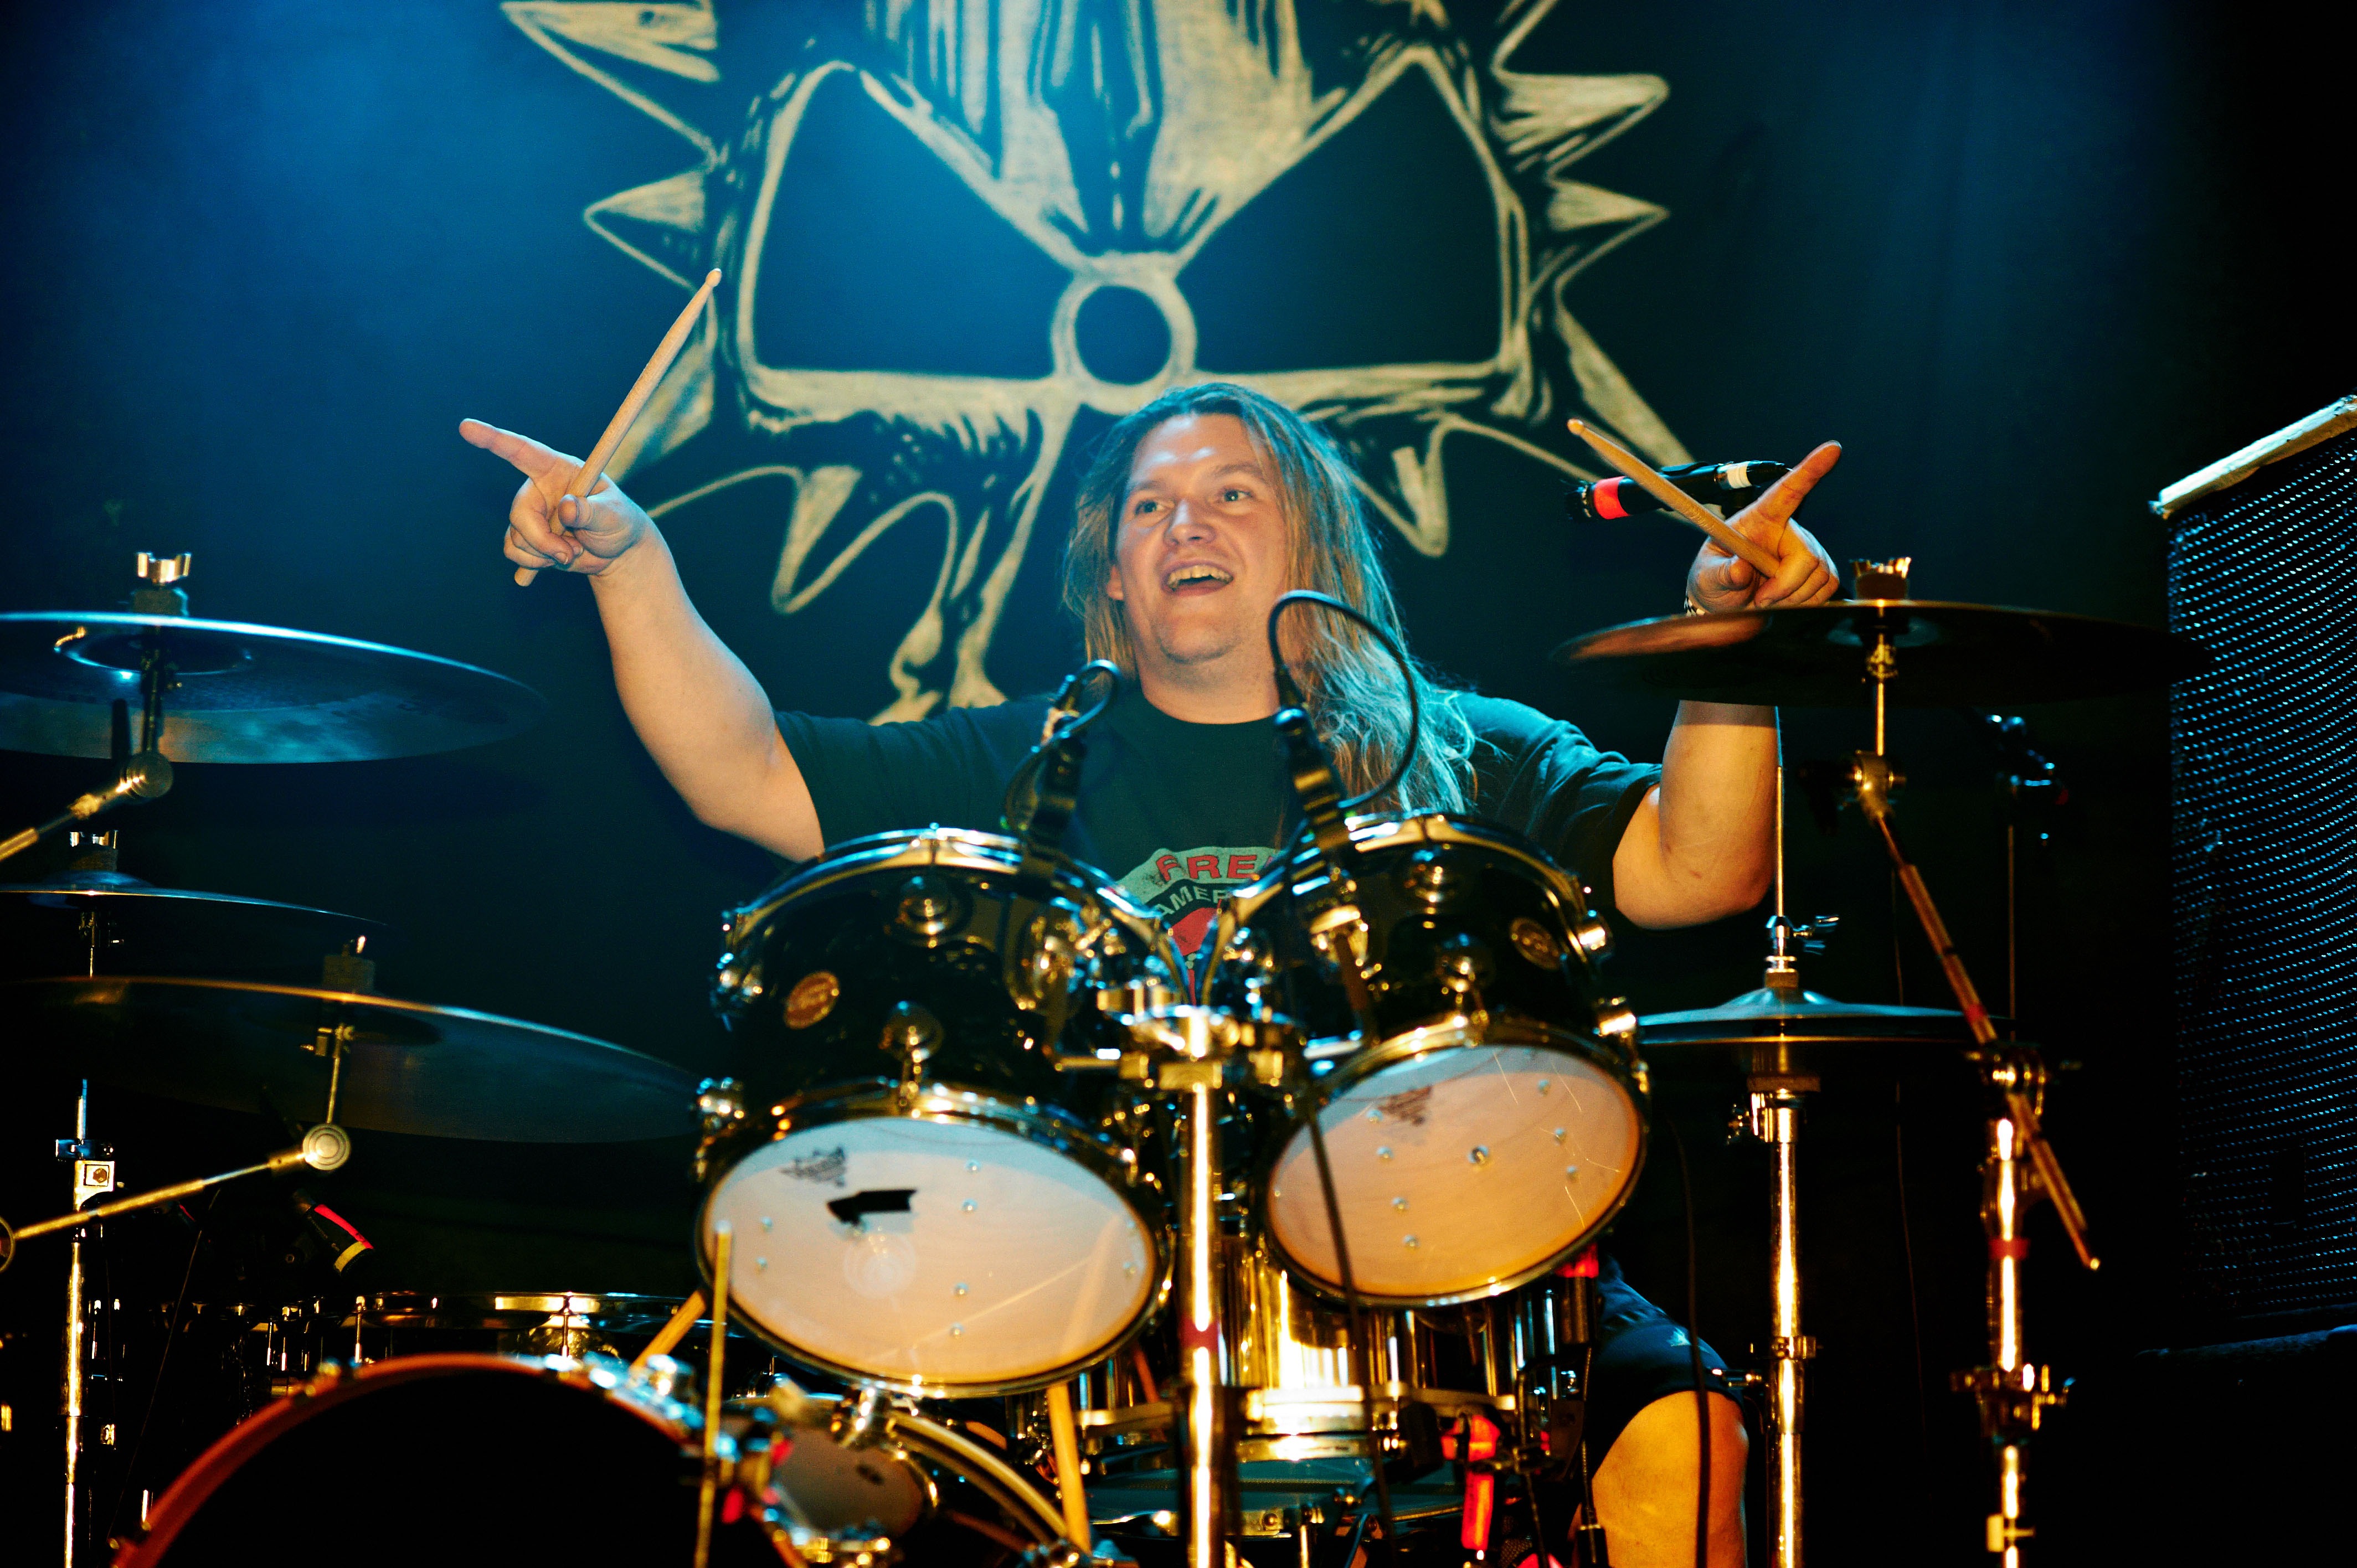 Reed Mullin of Corrosion of Conformity